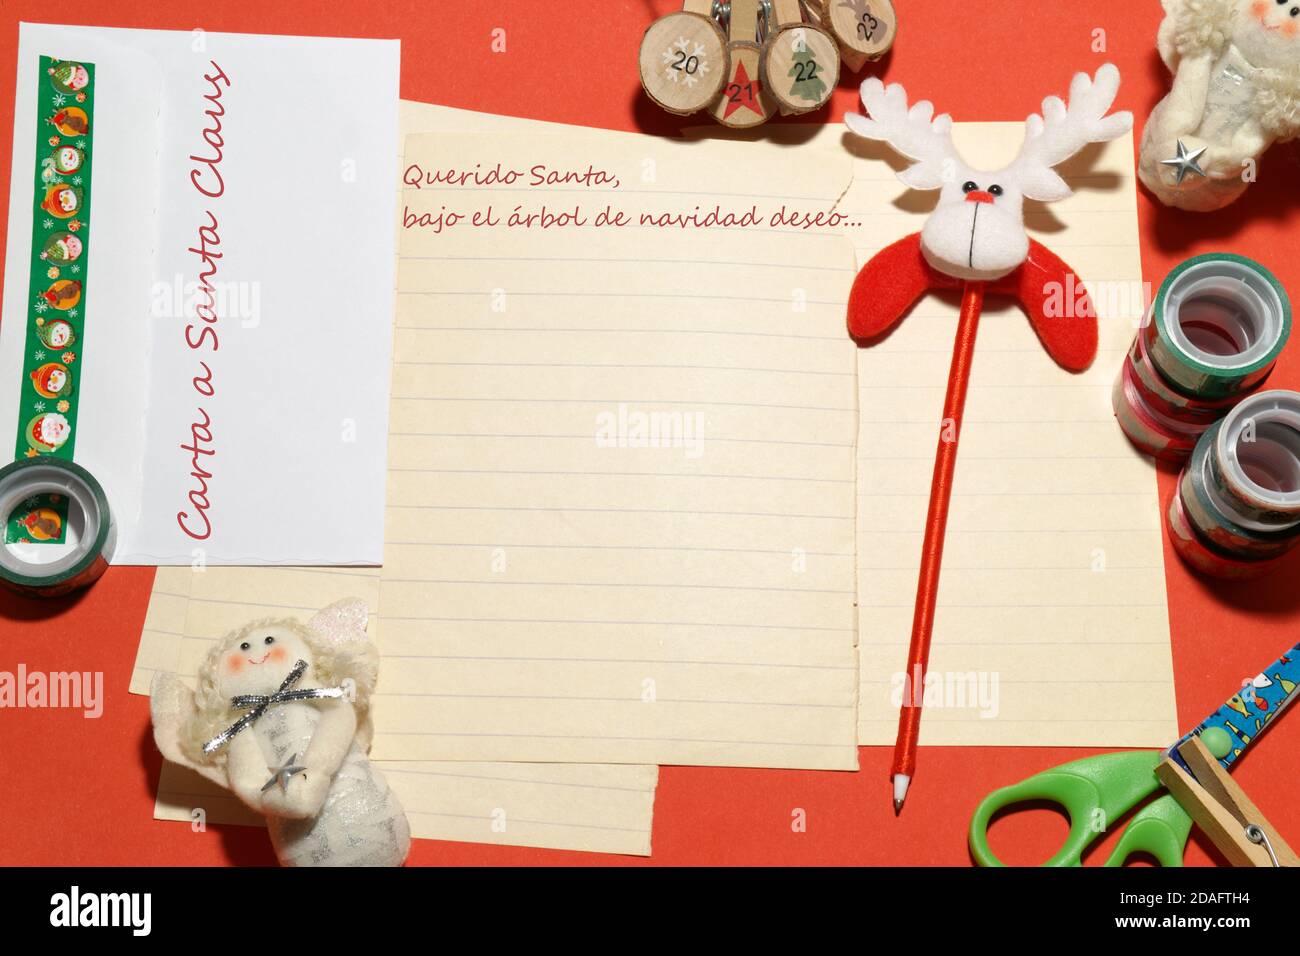 Letter, greeting card to Santa Claus in Spanish. Translation of Spanish text is: Letter to Santa Claus. Dear Santa, under the Christmas tree I wish... Stock Photo